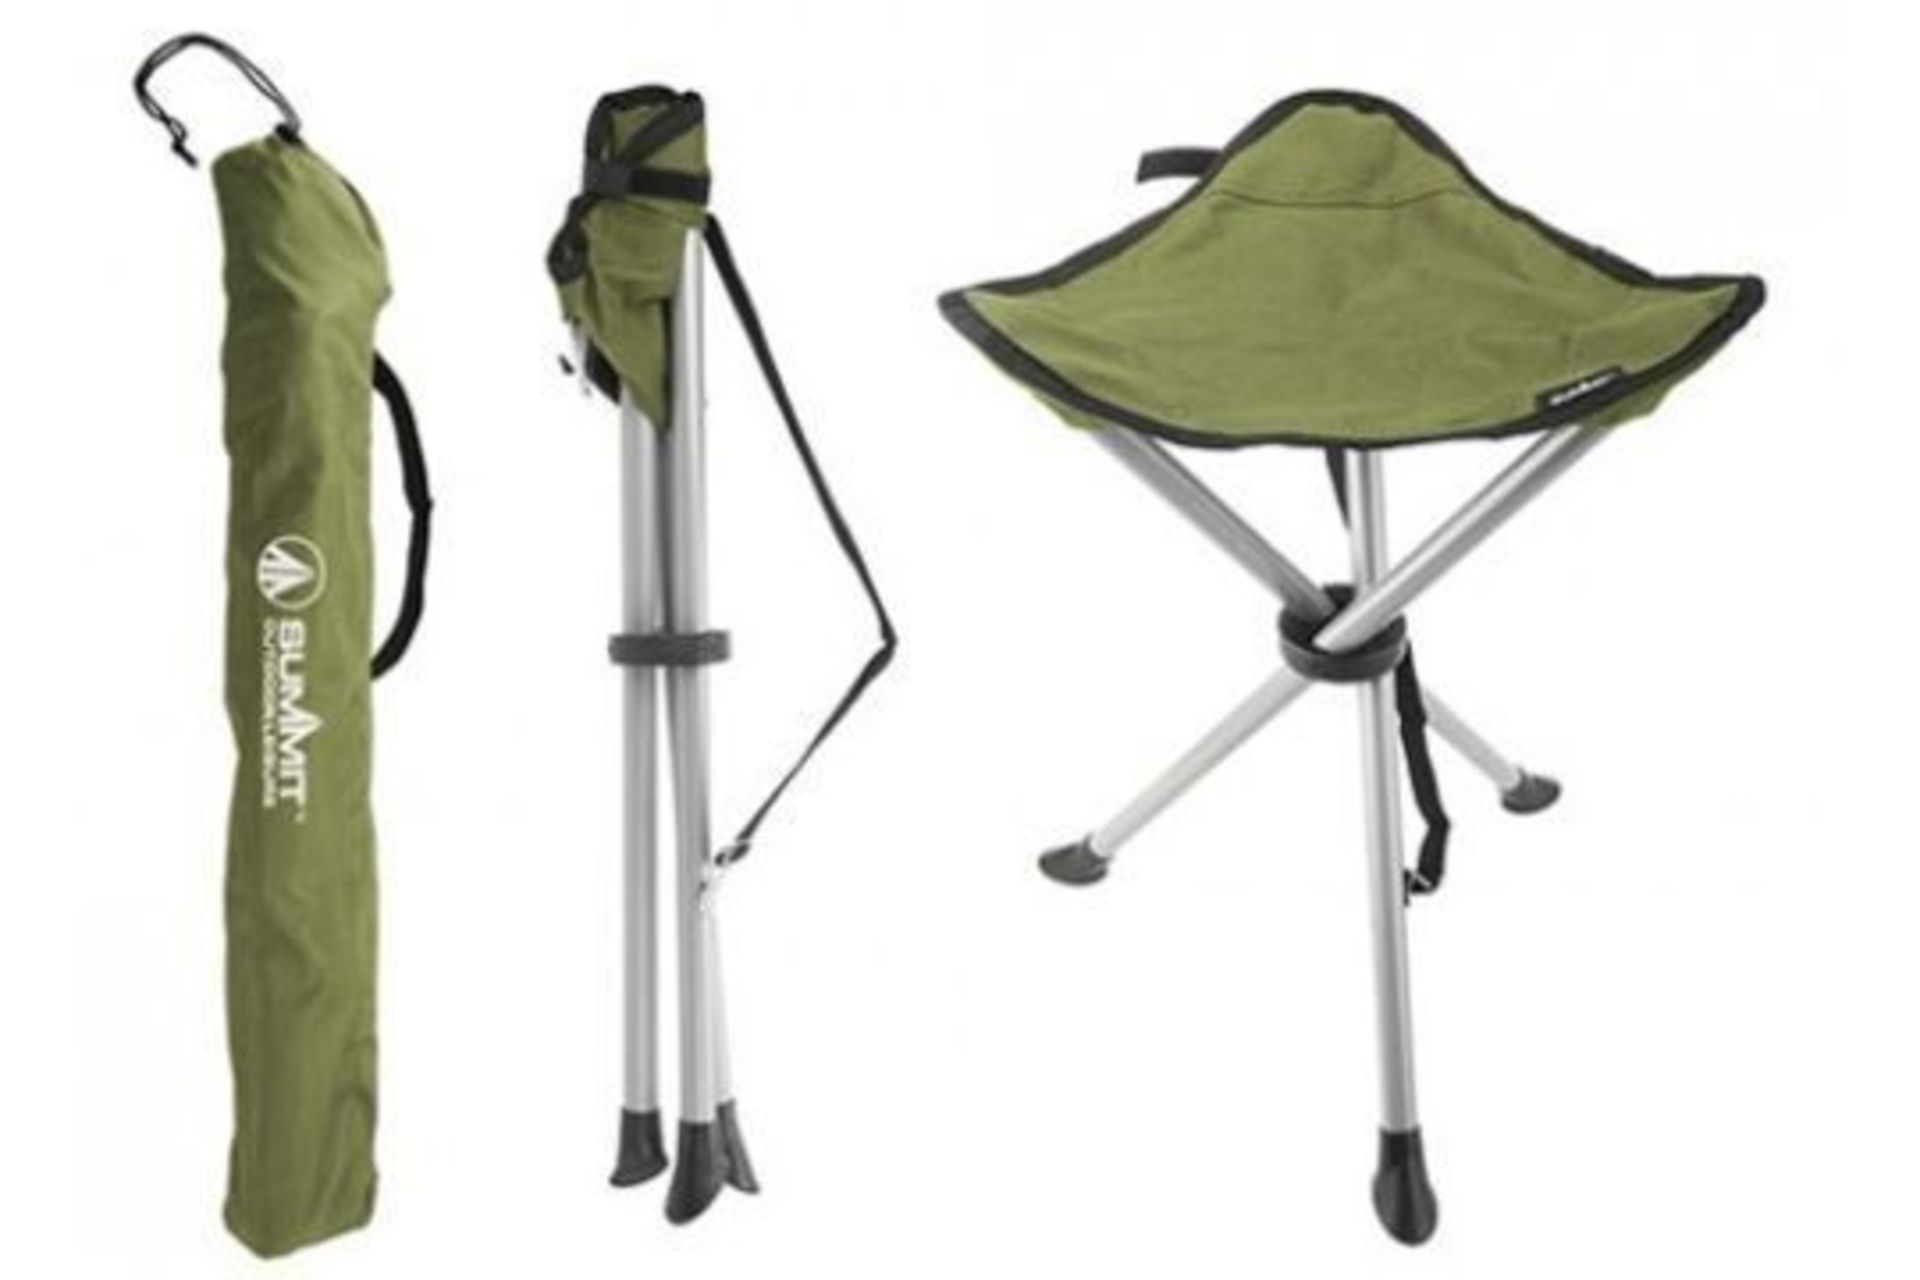 New Summit Tripod Stool With Carry Bag - Forest Green